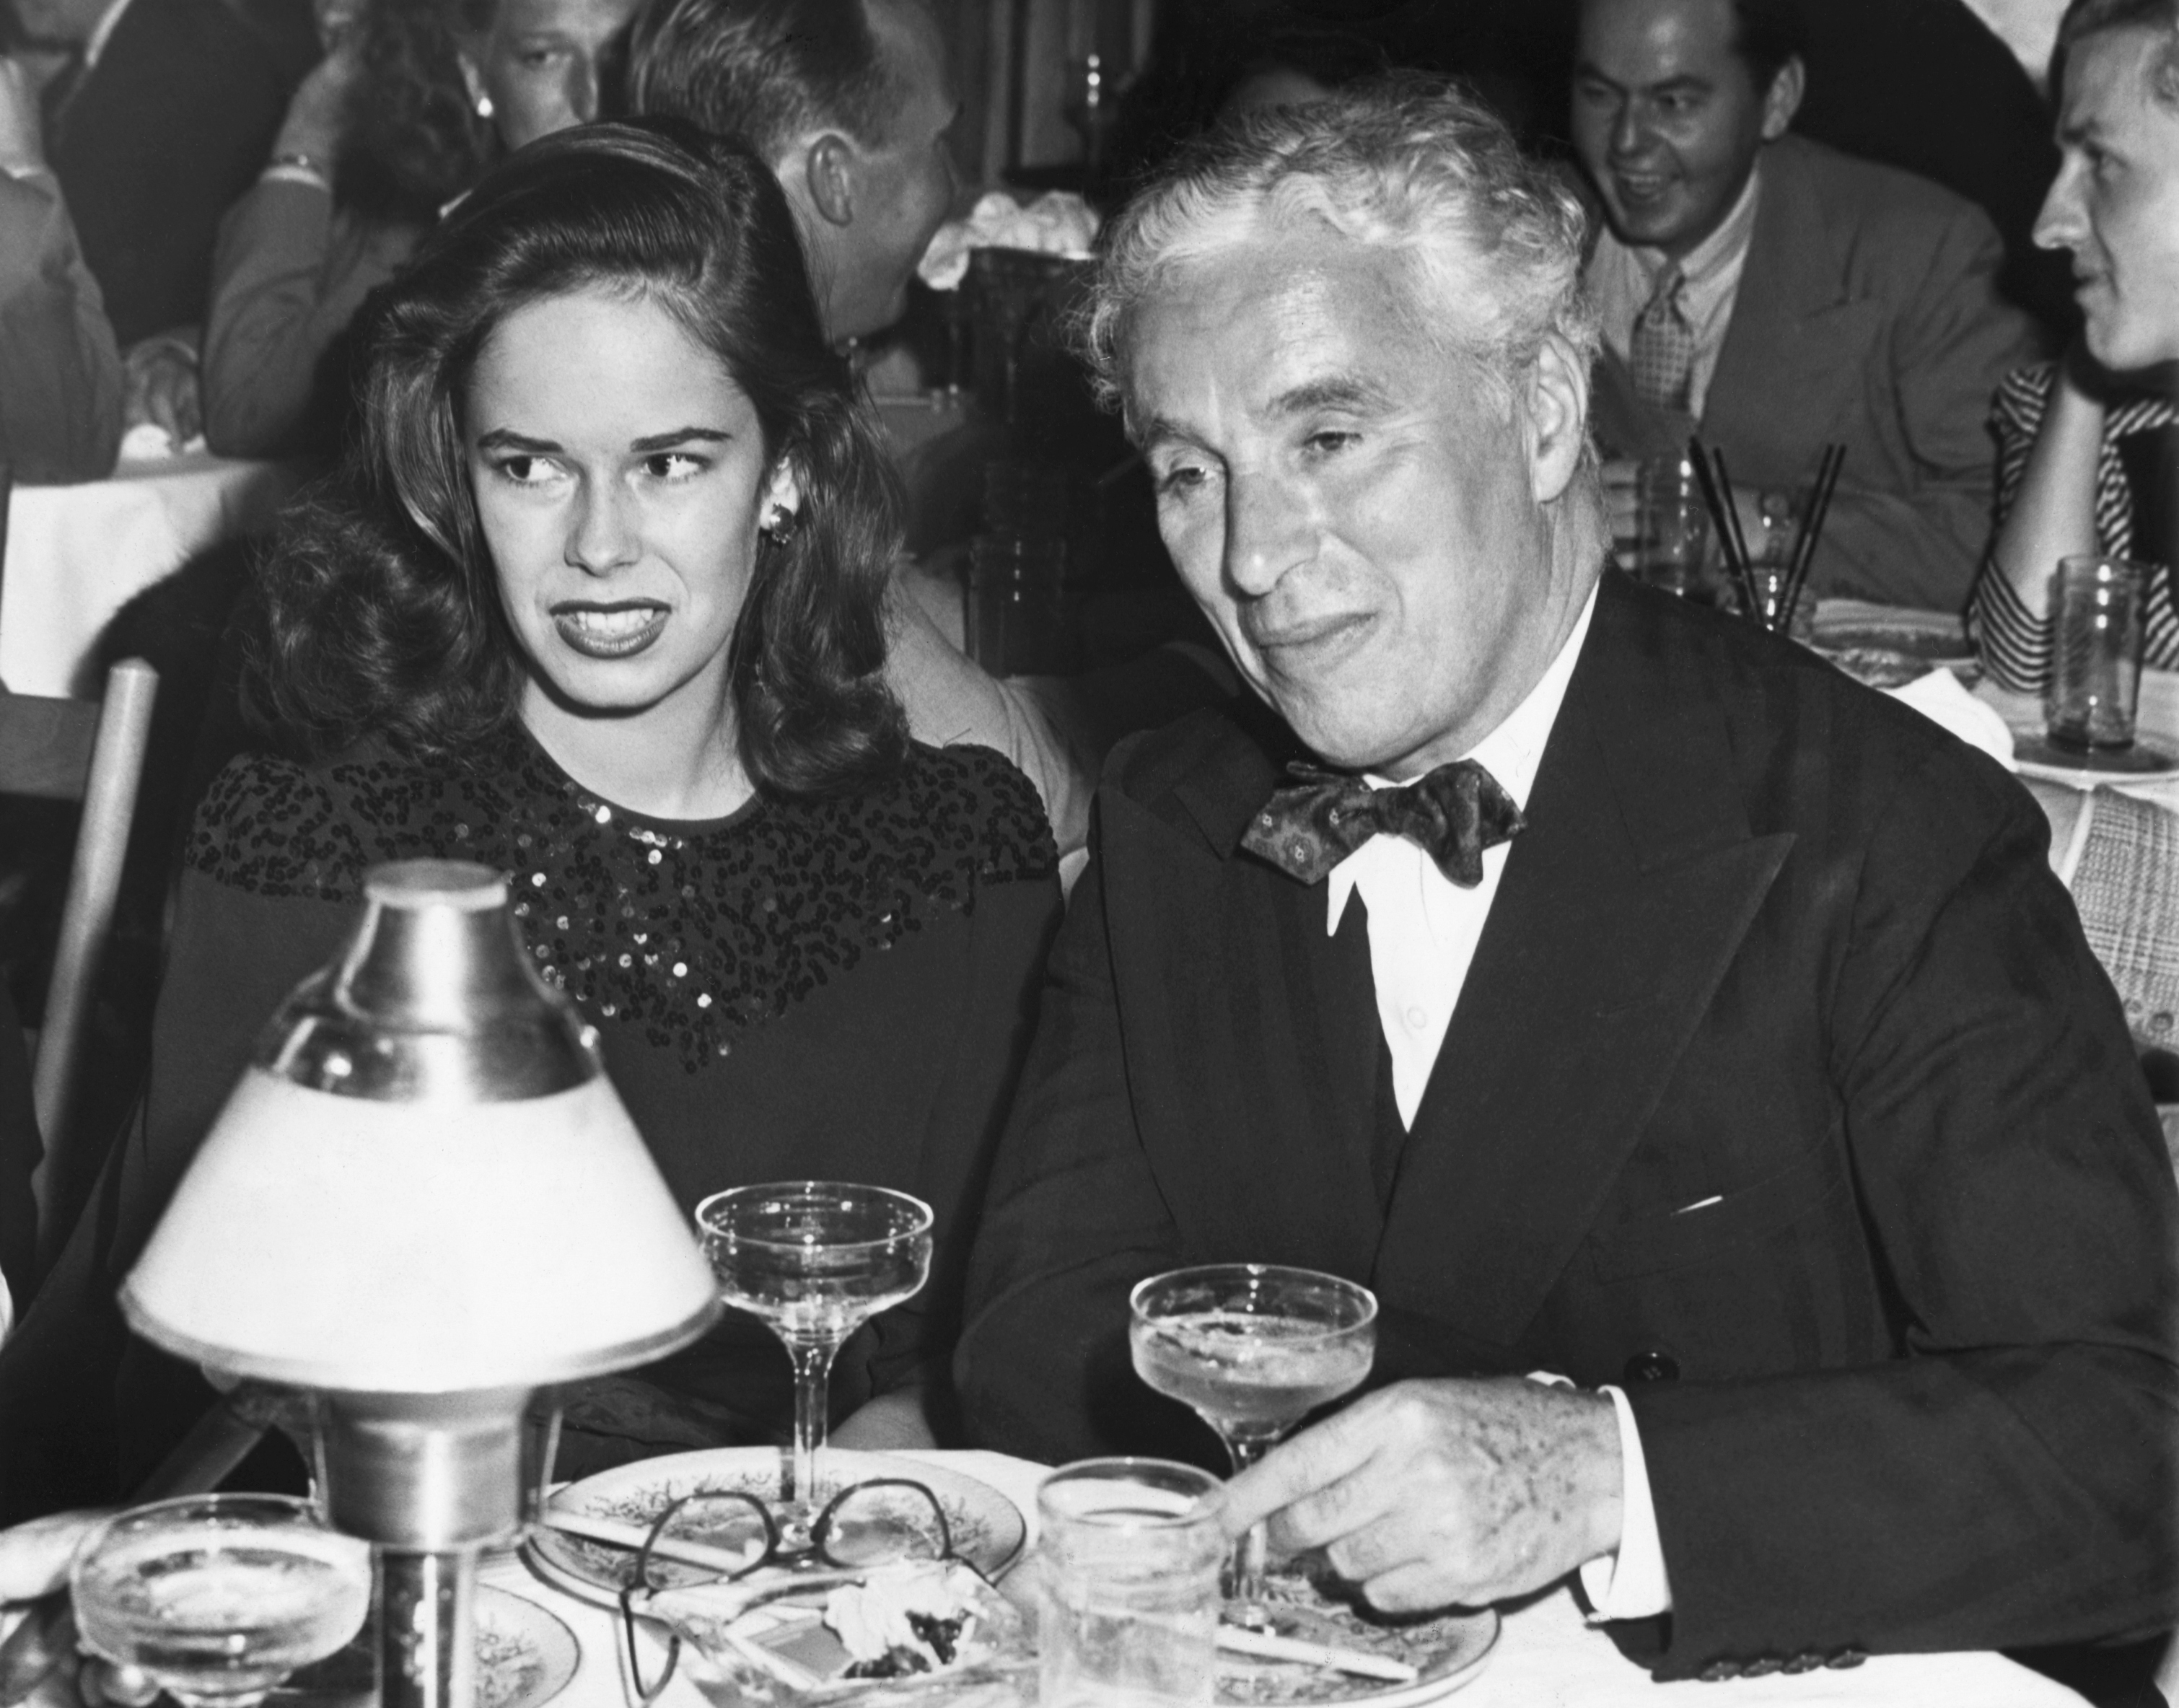 Charlie Chaplin and his then new bride, 18-year-old Oona, making their first public appearance at the nightclub Mocambo on July 3, 1943 | Source: Getty Images